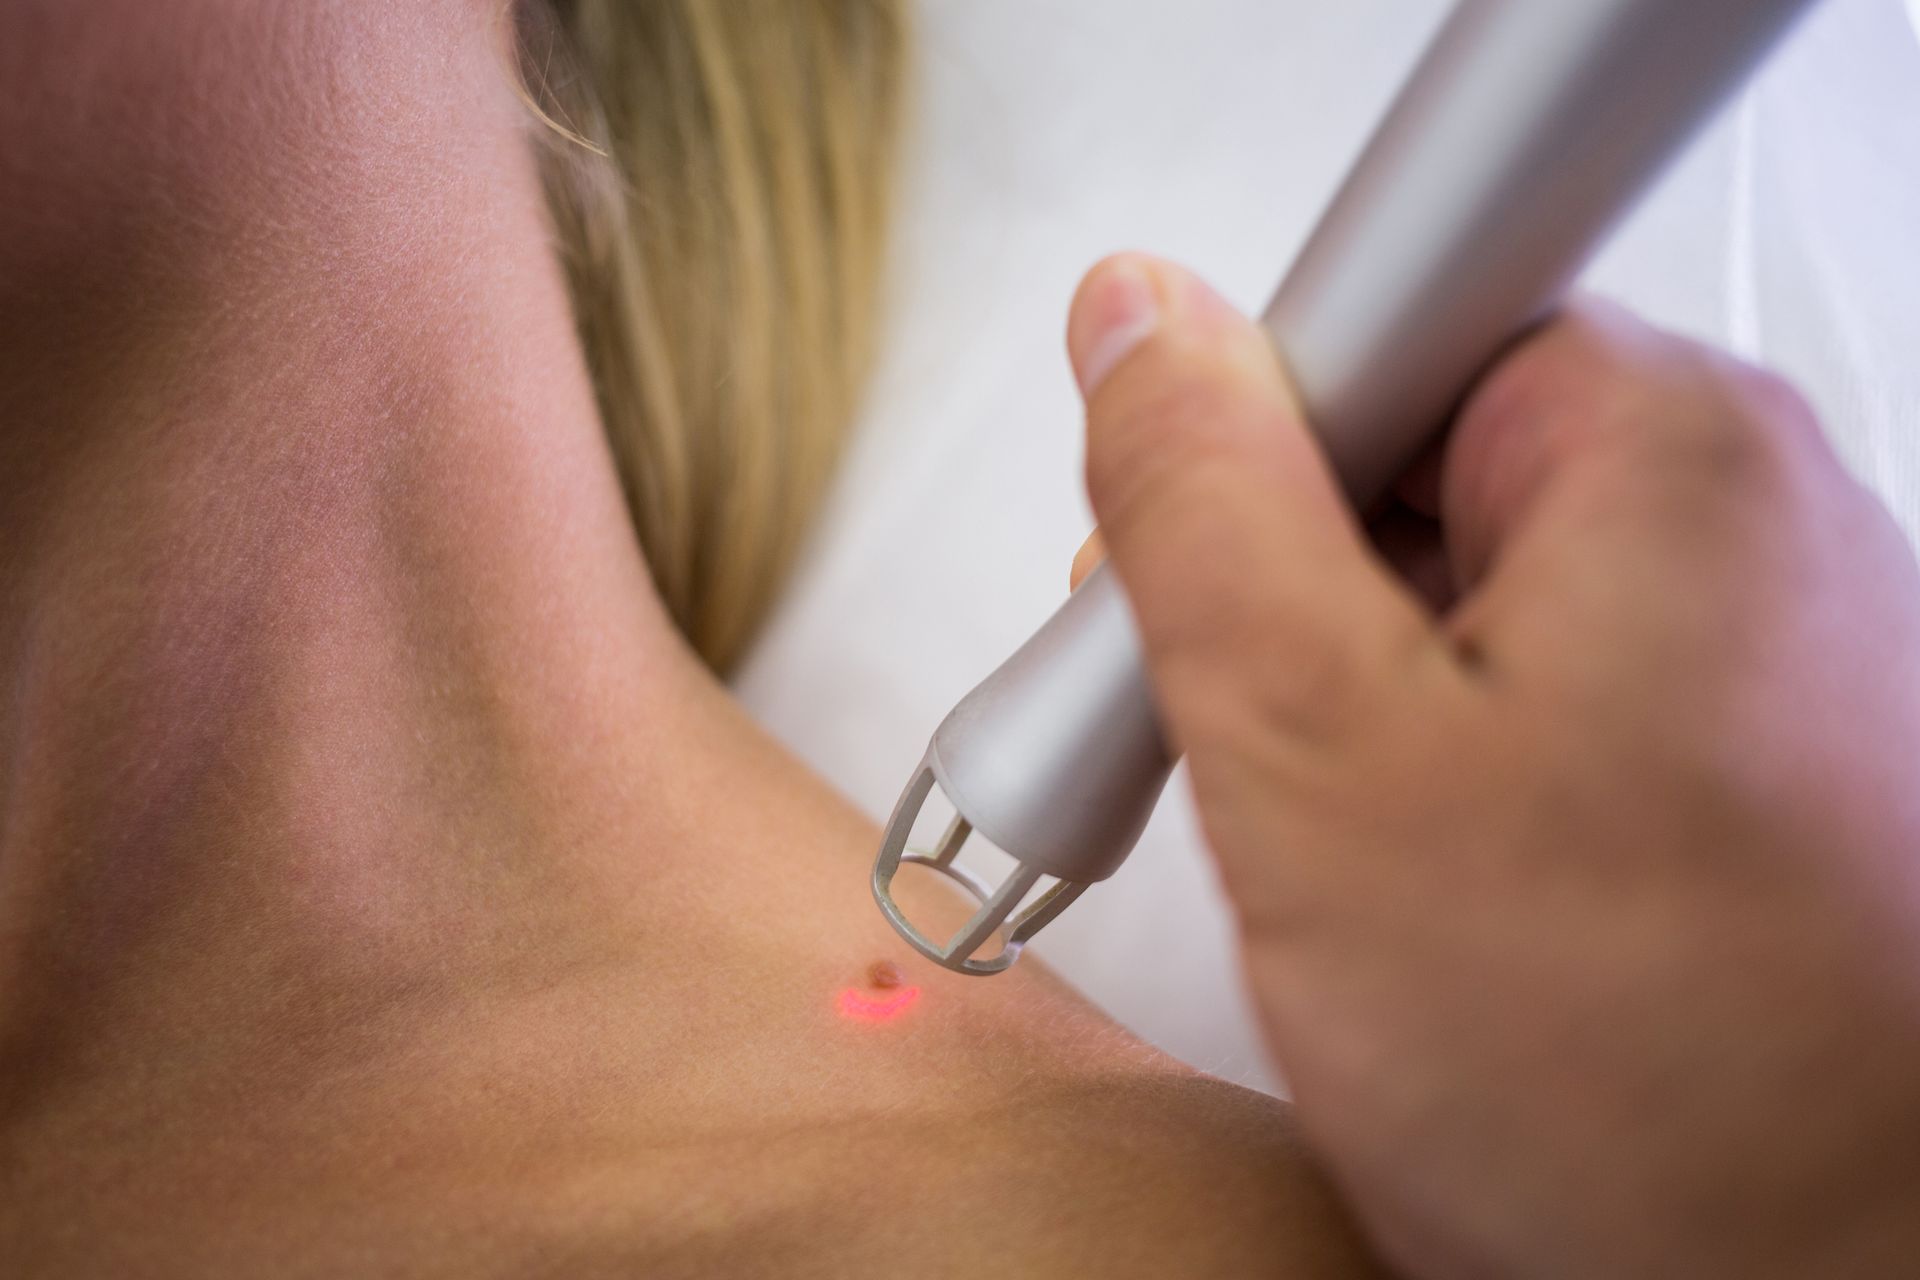 dermatologist removing a mole from the woman's shoulder